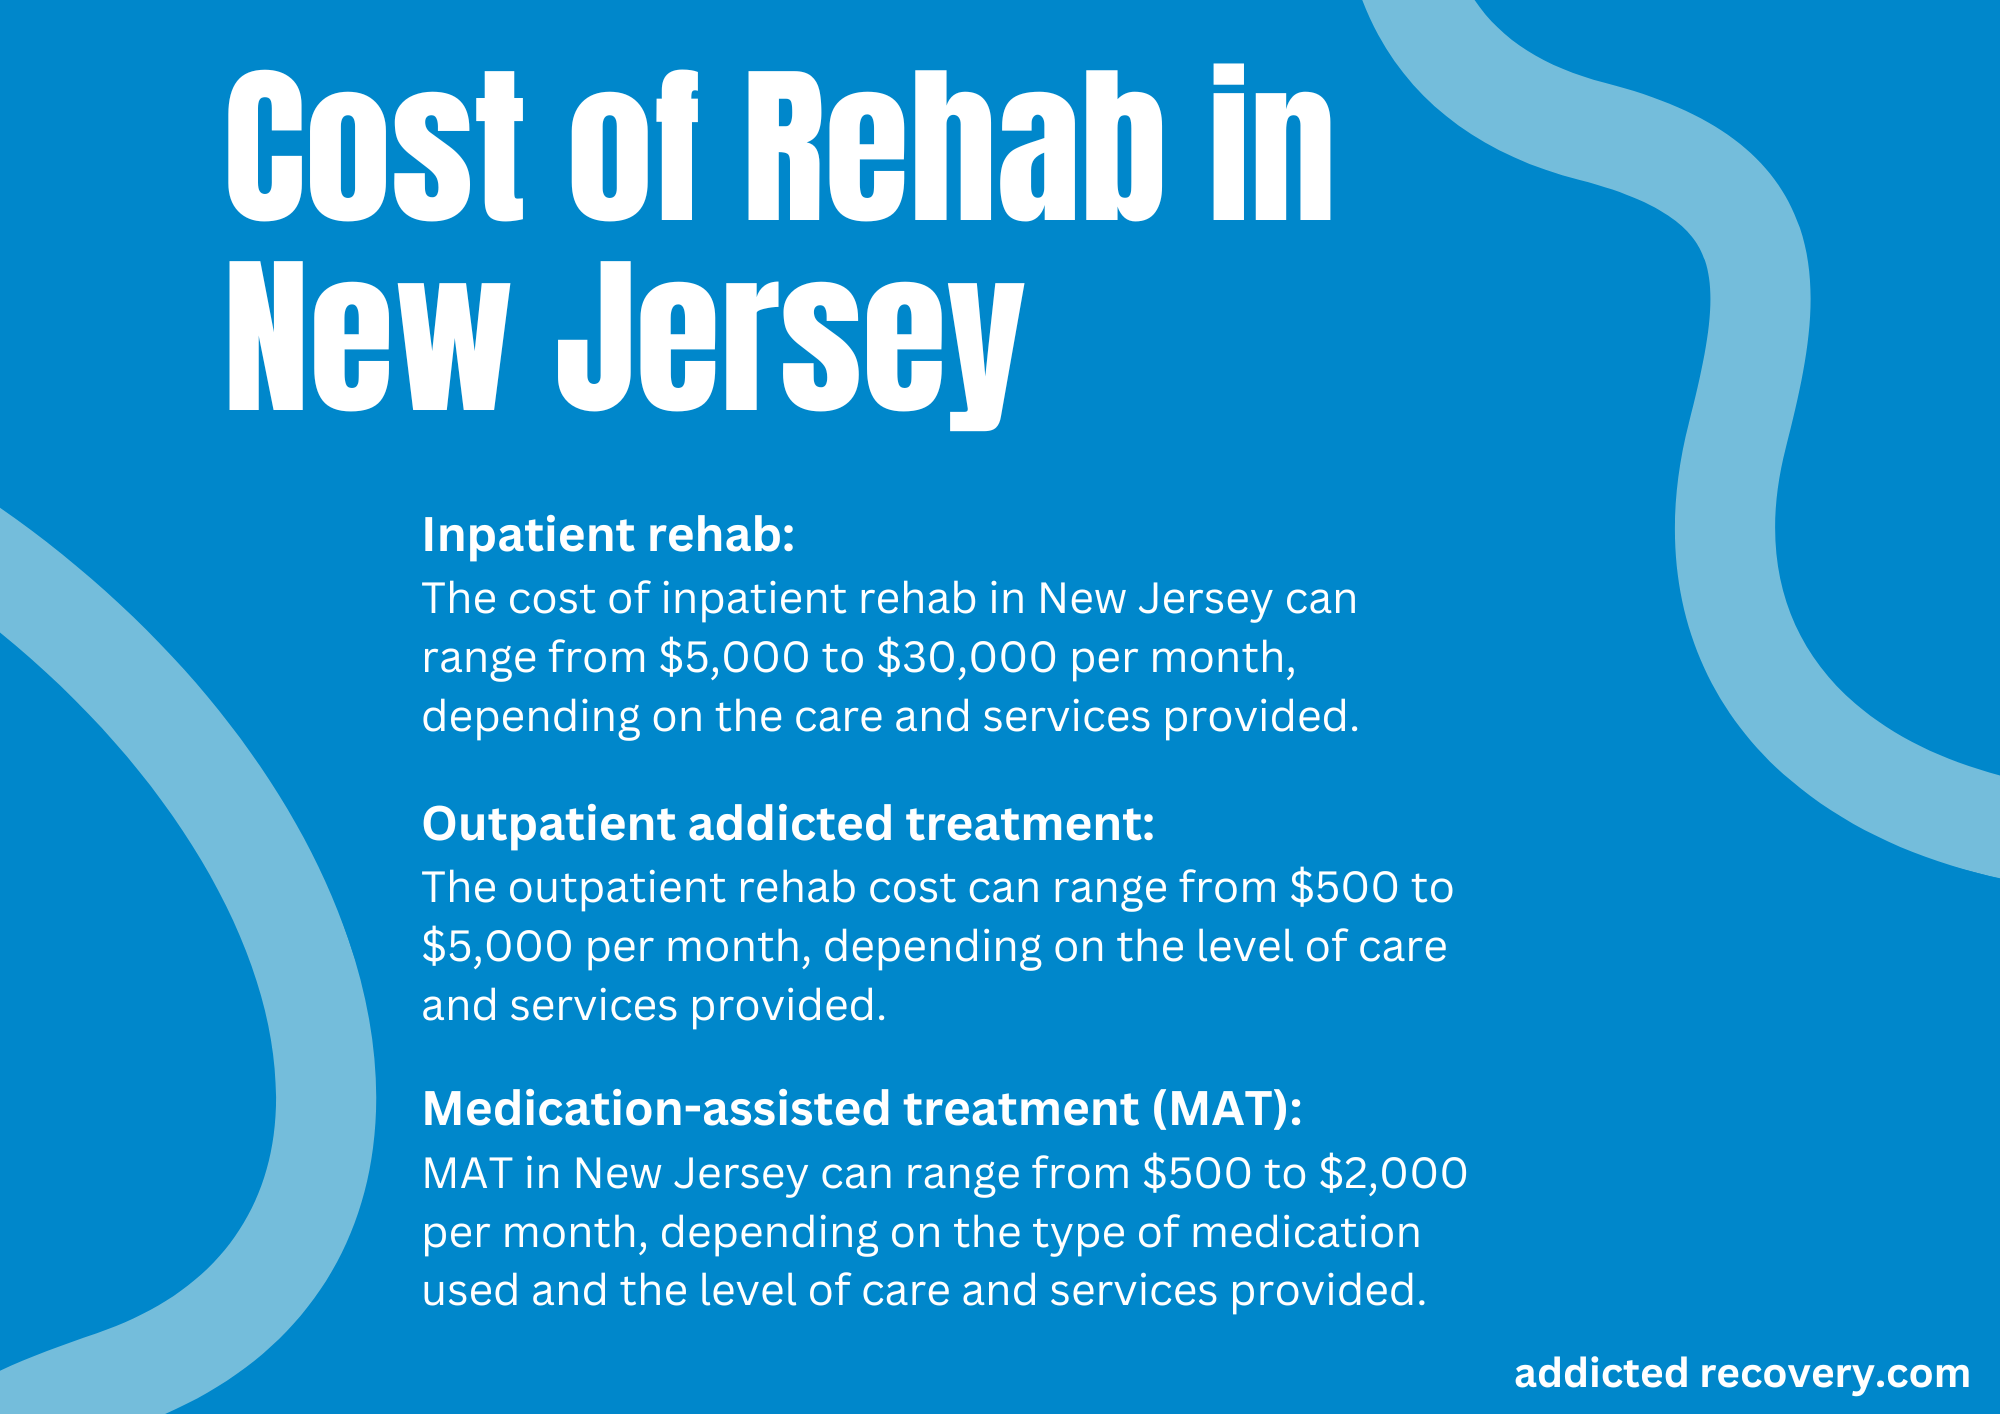 Looking For Alcohol Rehab NJ 